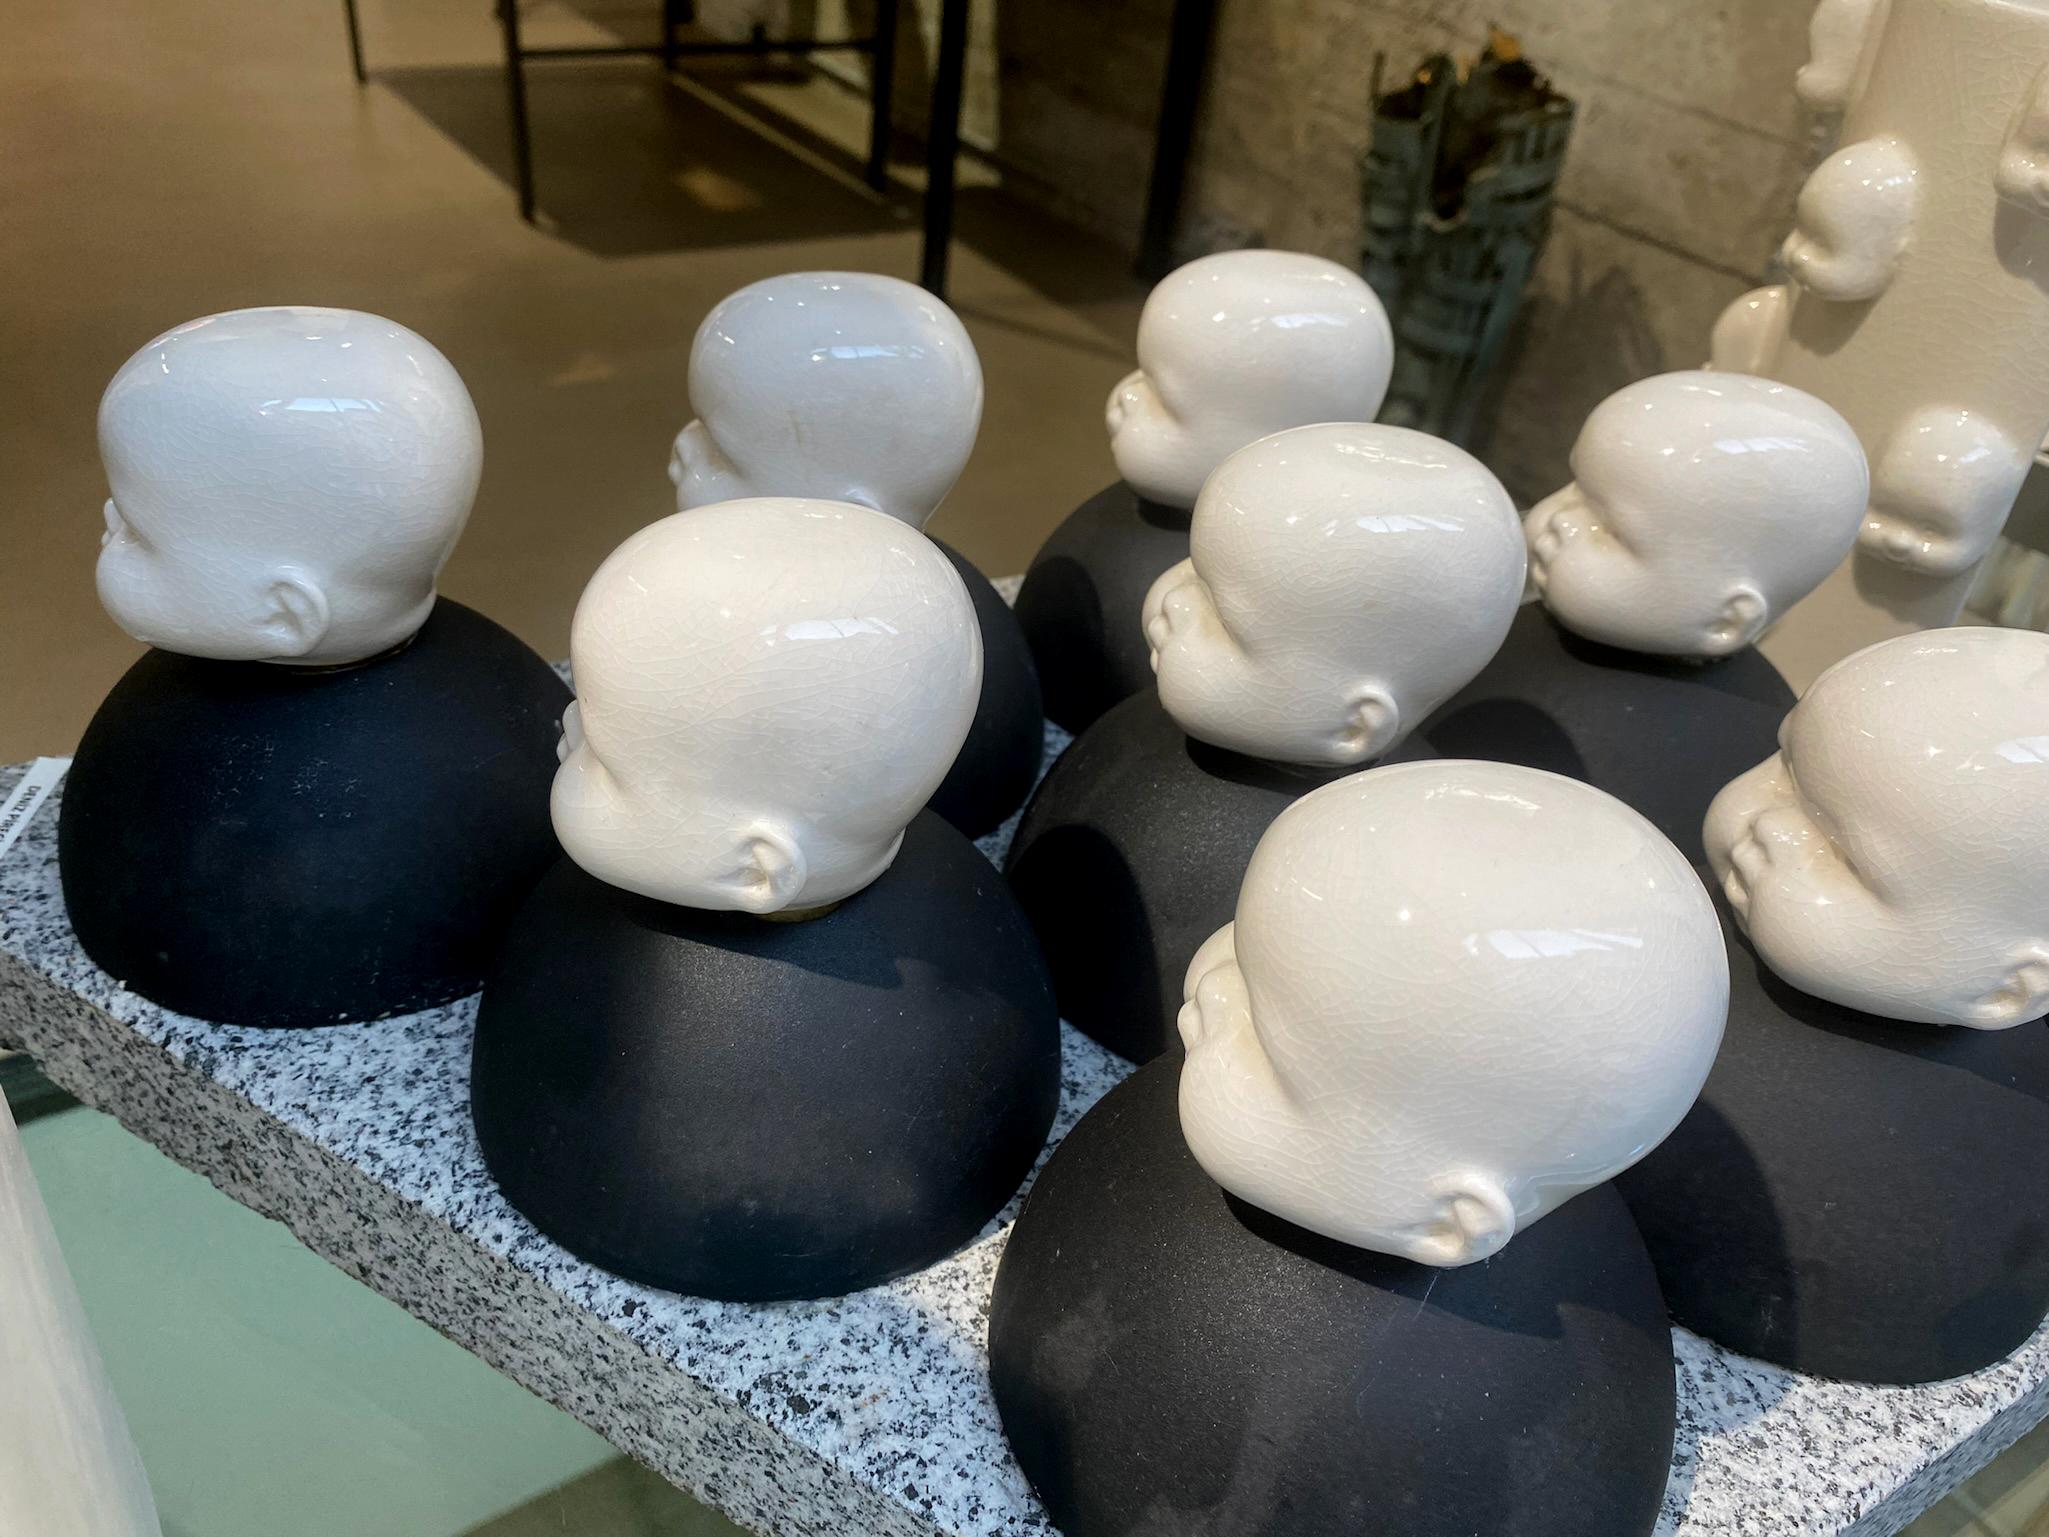 Porcelain on granite

Deniz Pireci's works; He tries to rediscover all the meanings contained in ceramics as a tool, to emphasize them even more, and sometimes simply to reveal them. As a tool, it is obvious that porcelain refers to fragility,